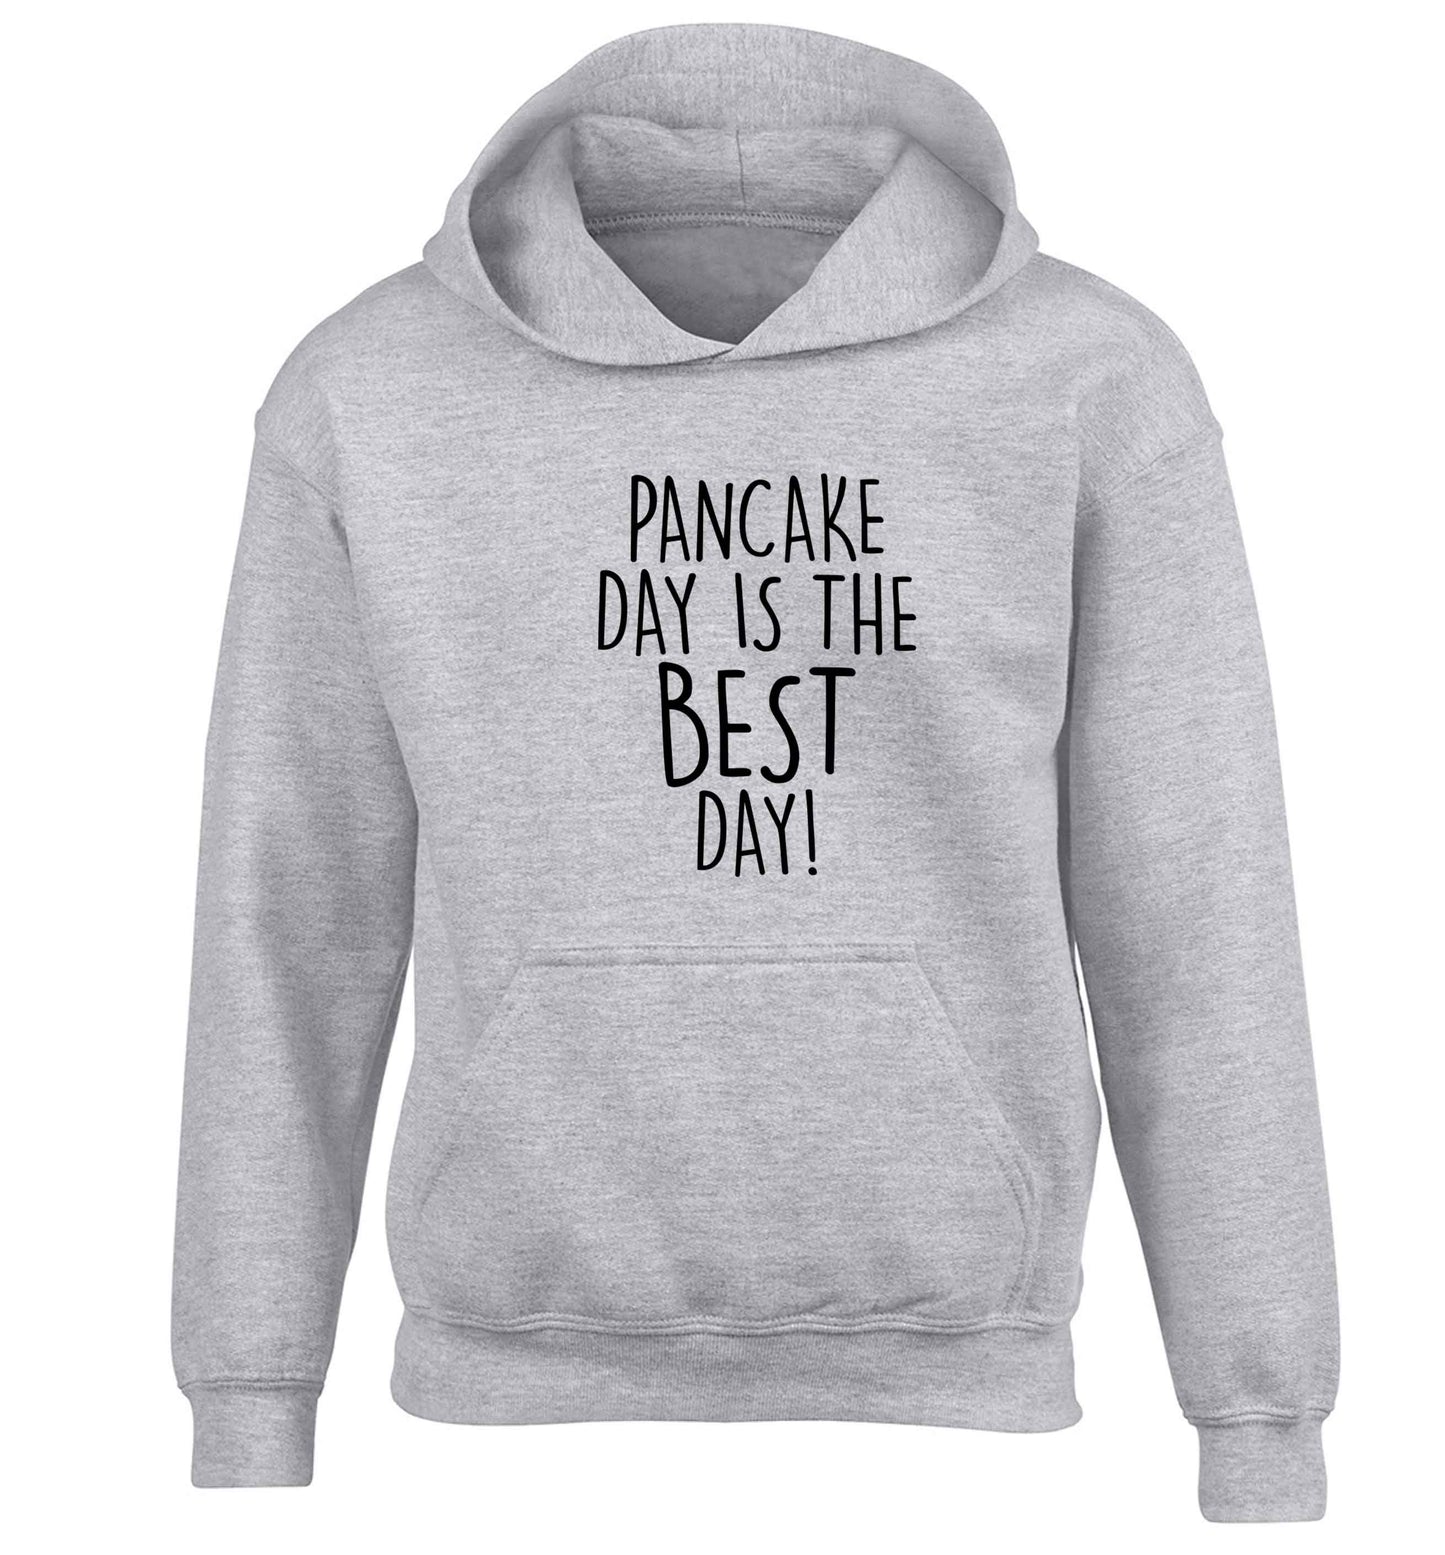 Pancake day is the best day children's grey hoodie 12-13 Years